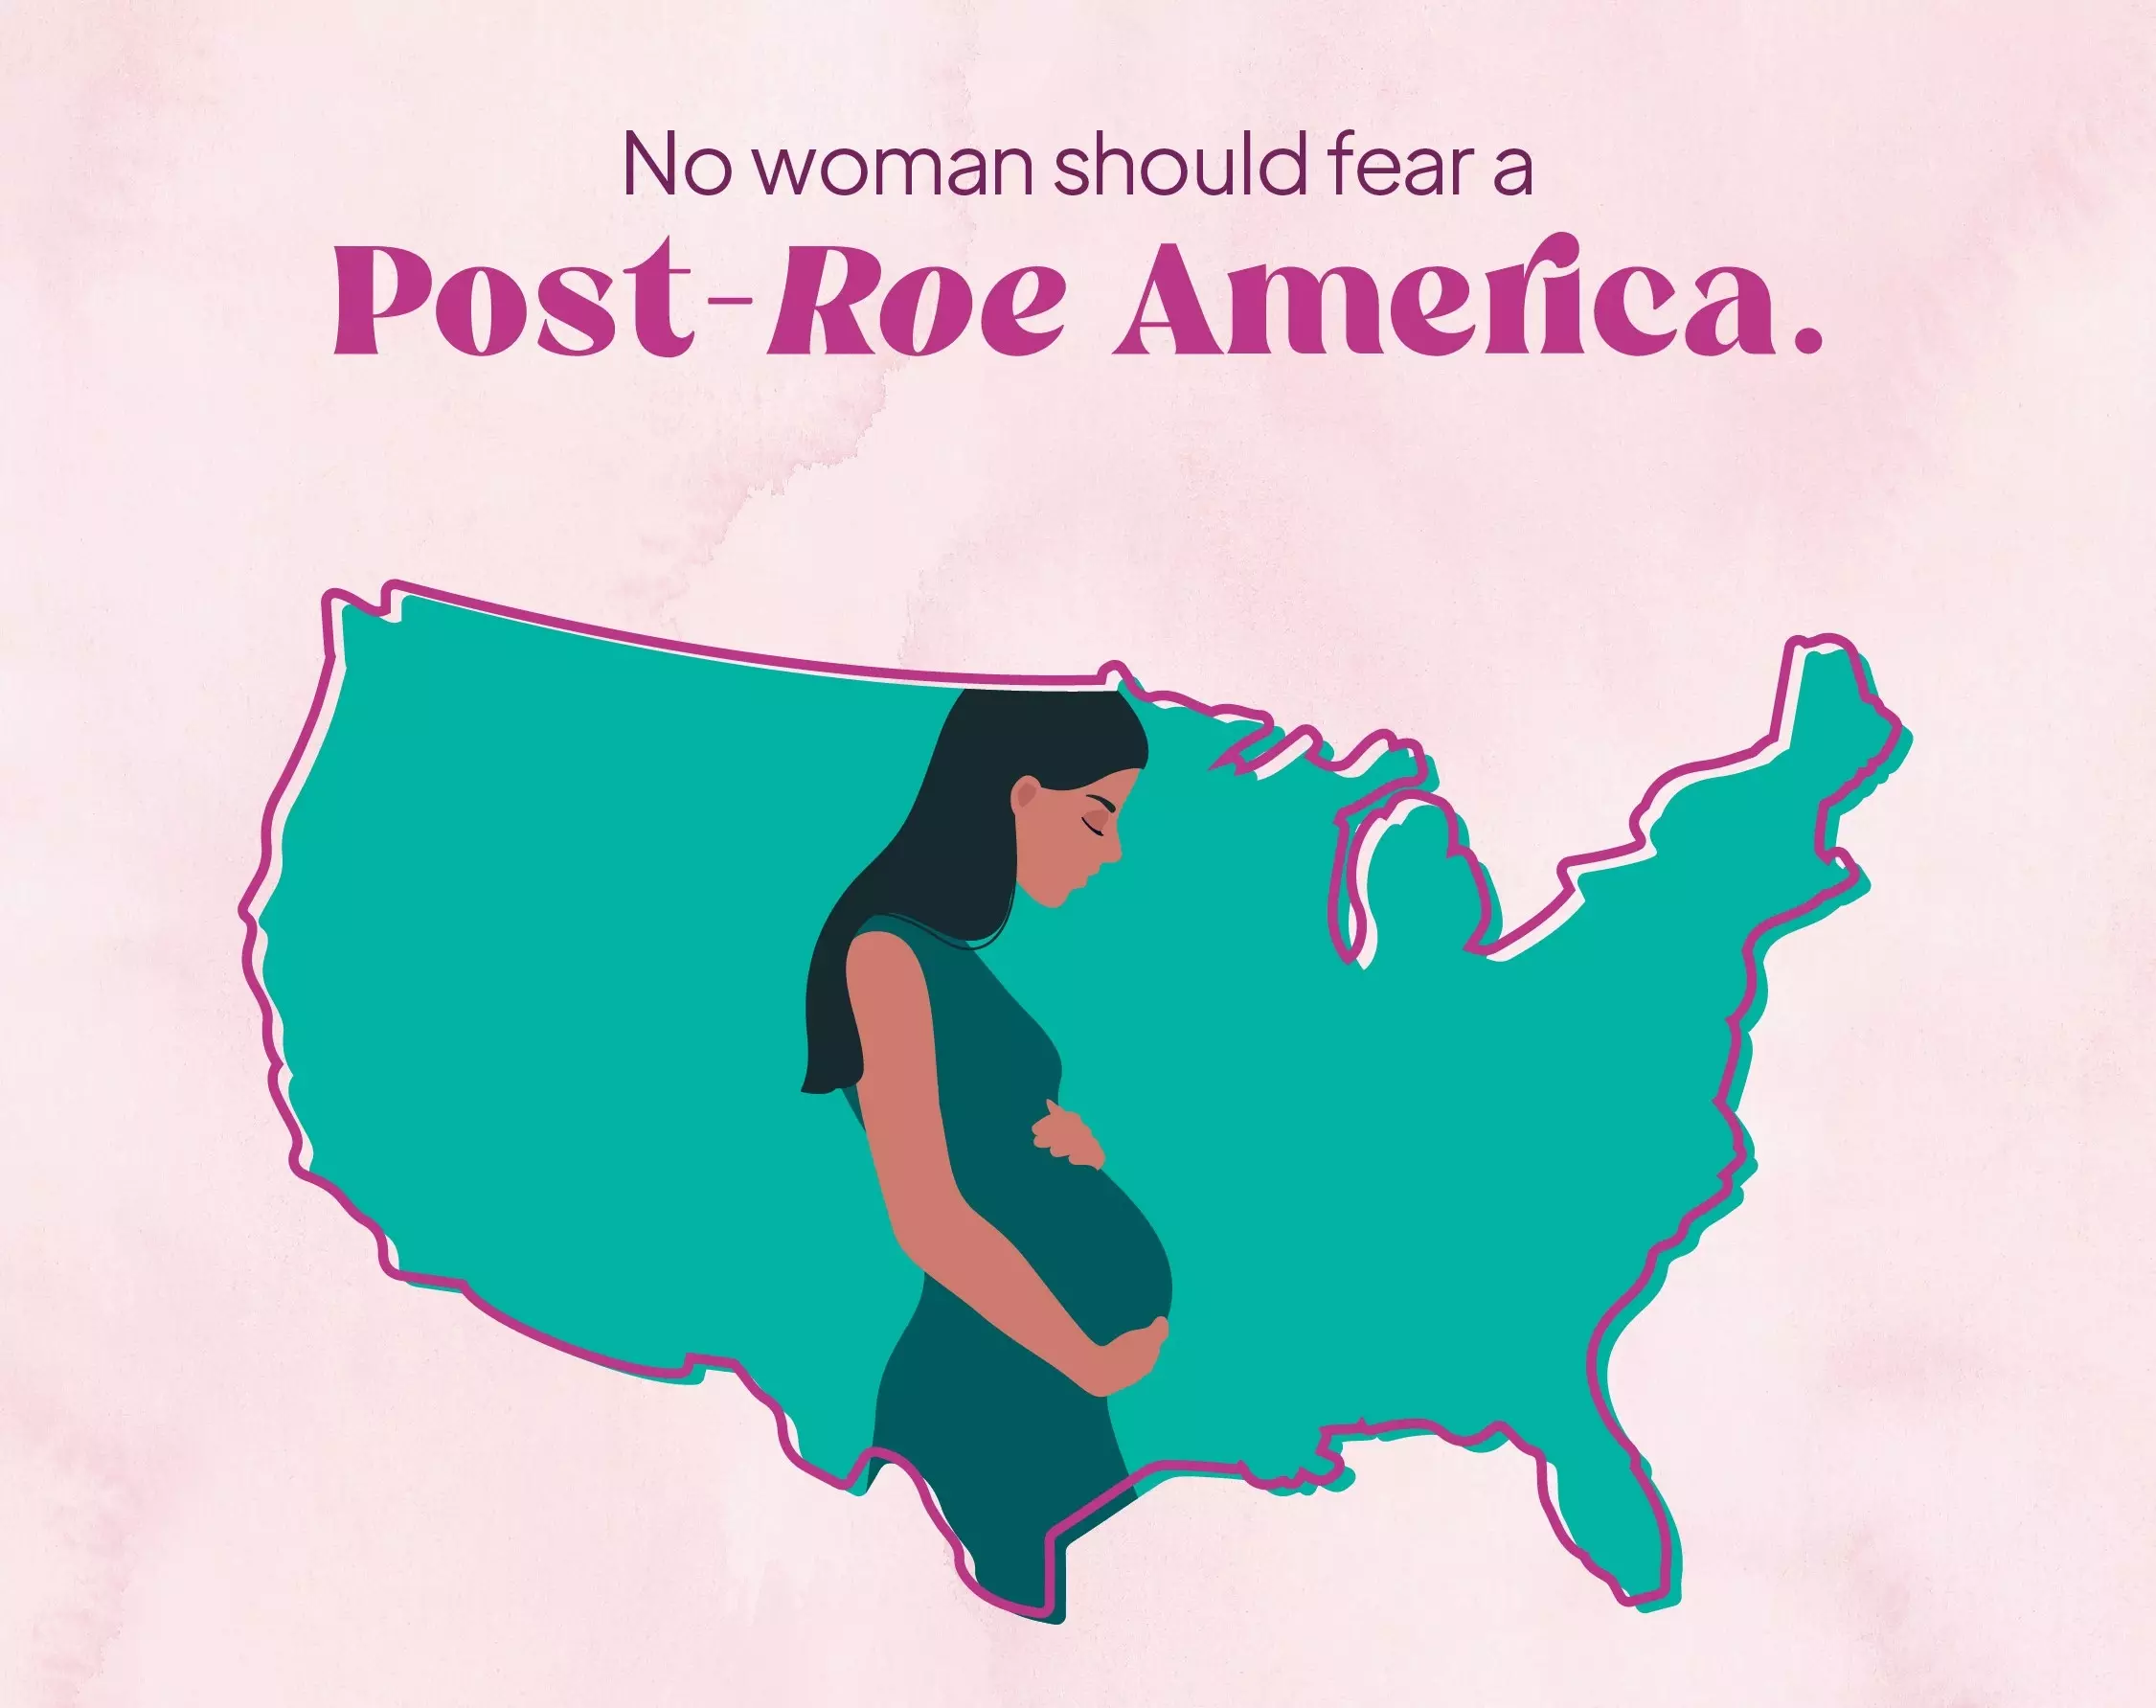 “No woman stands alone” pro-life groups tell women in anticipation of post-Roe world